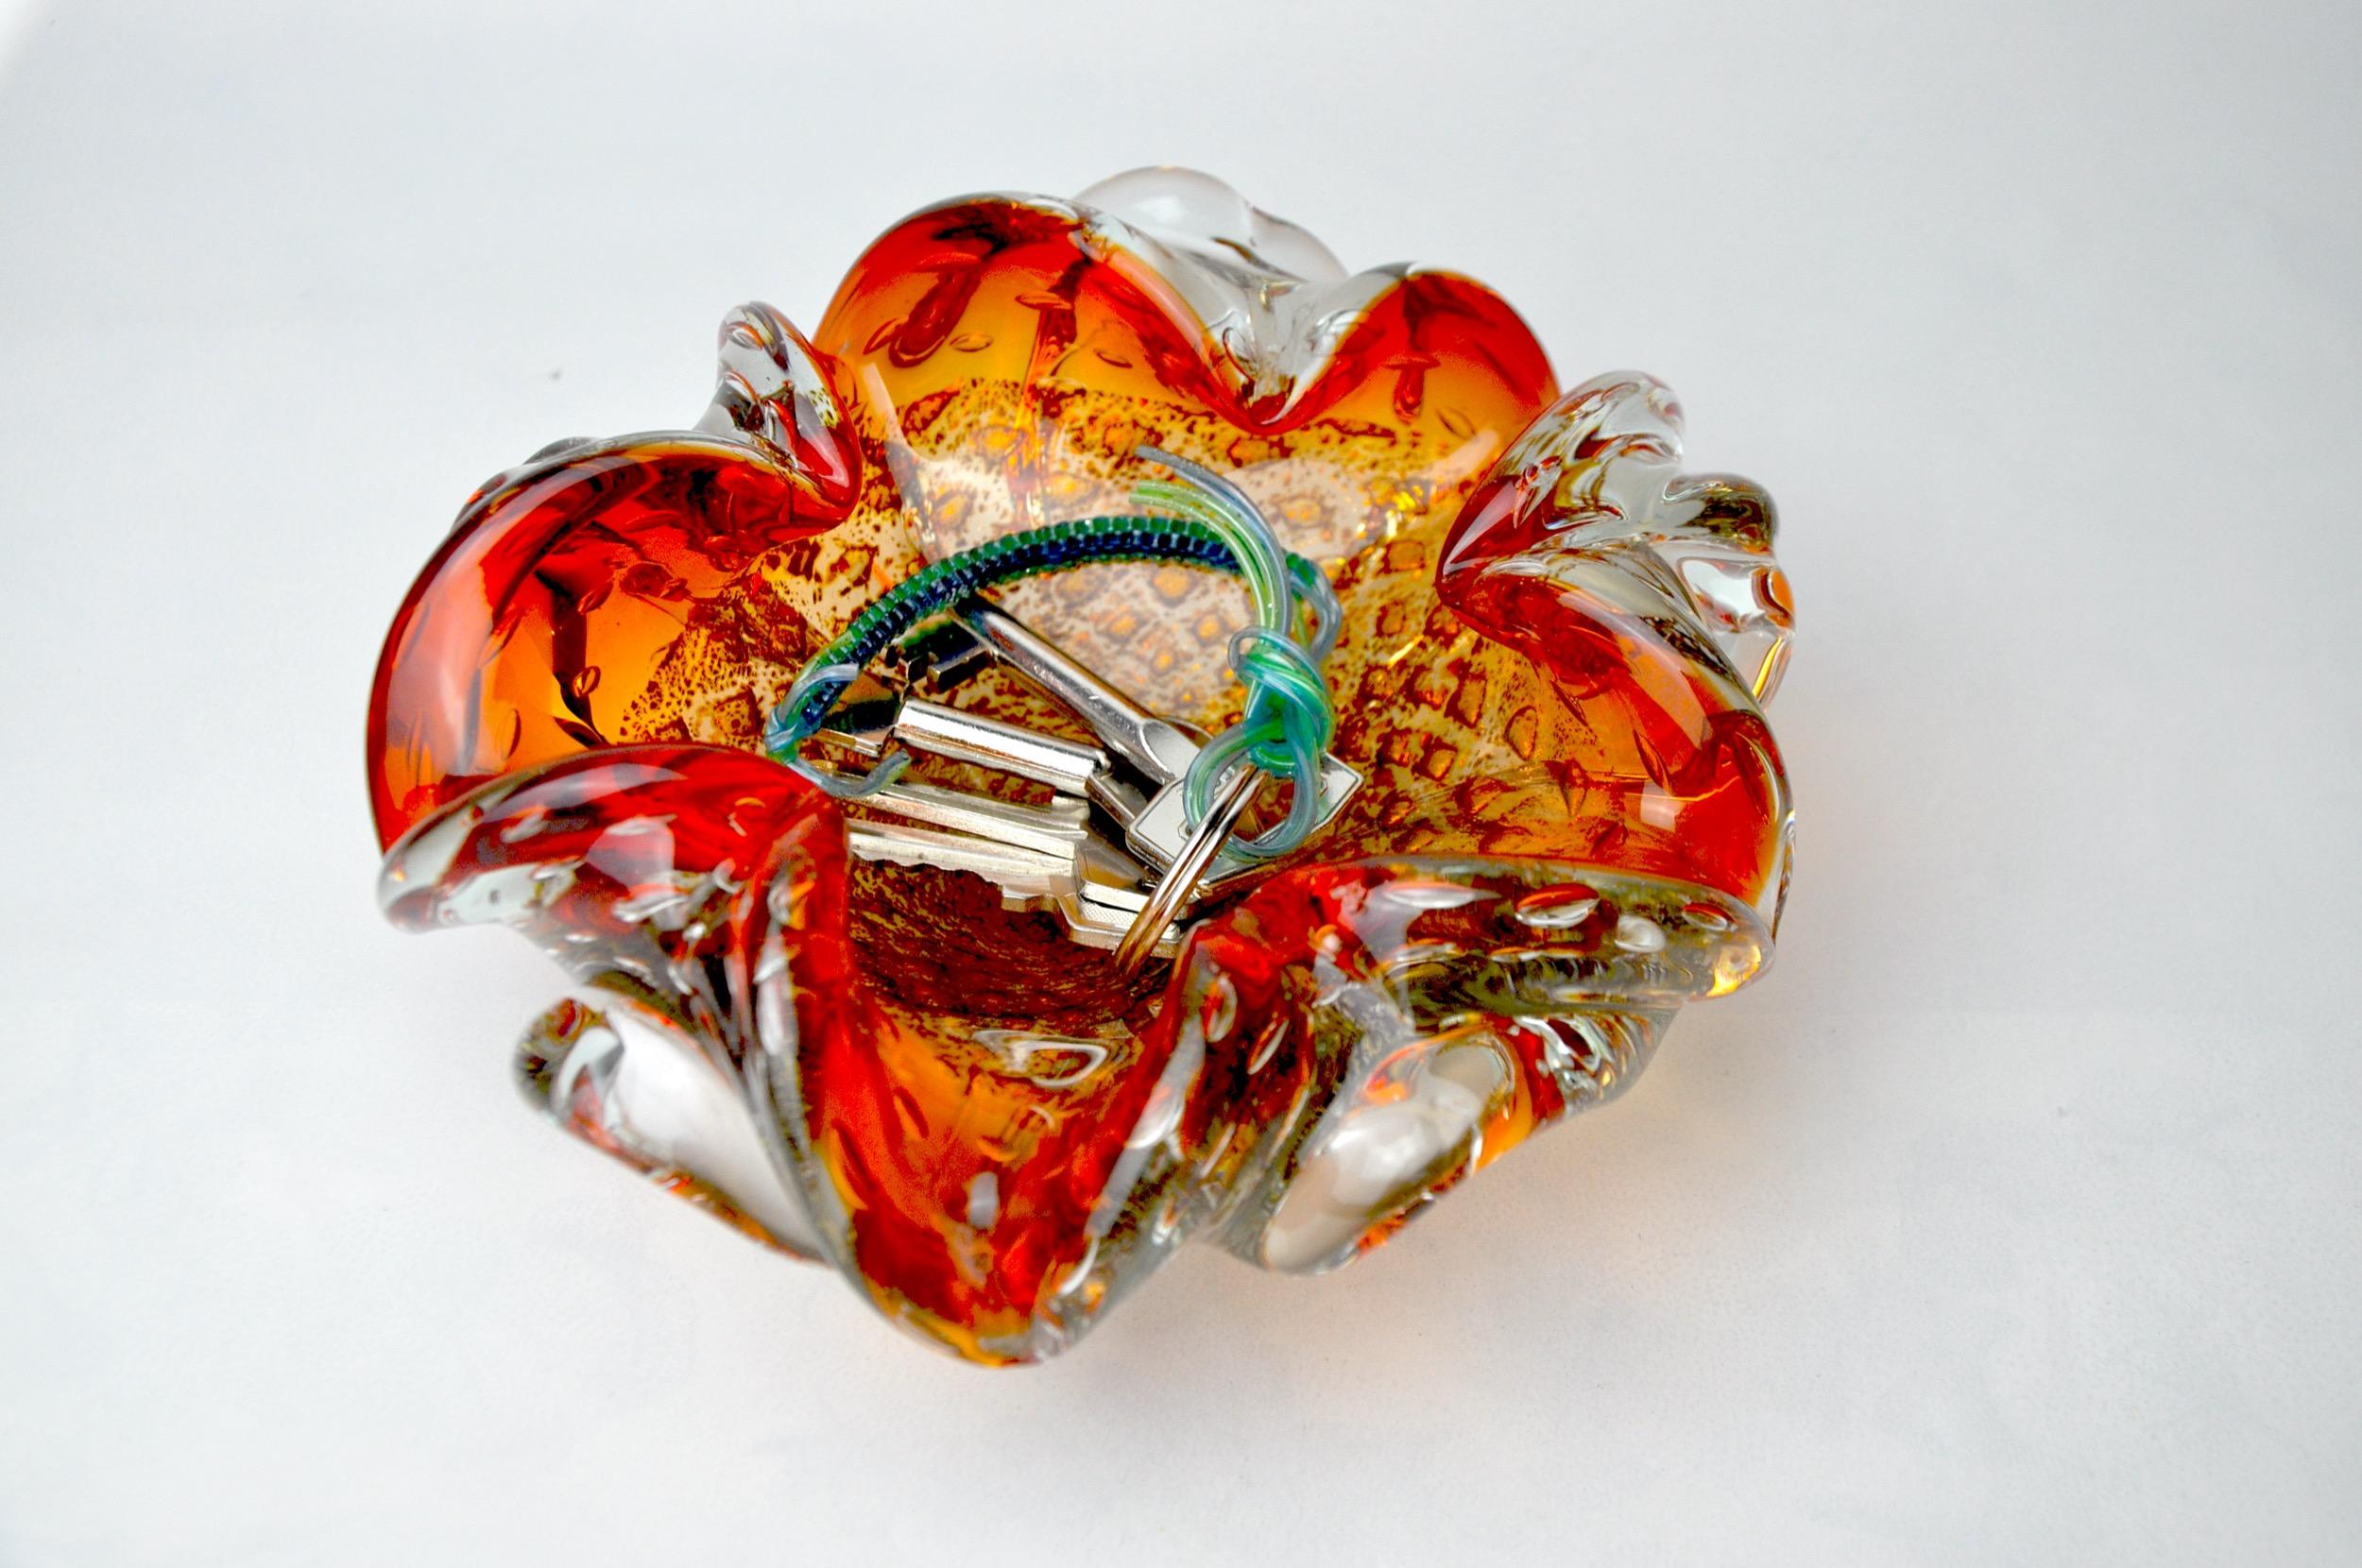 Superb and rare key removal or ashtray sommerso orange and gold designated and manufactured for seguso in murano in the 1970s. Artisanal work of glass according to the sommerso technique (superposition of layers of molten glass). Magnificent object